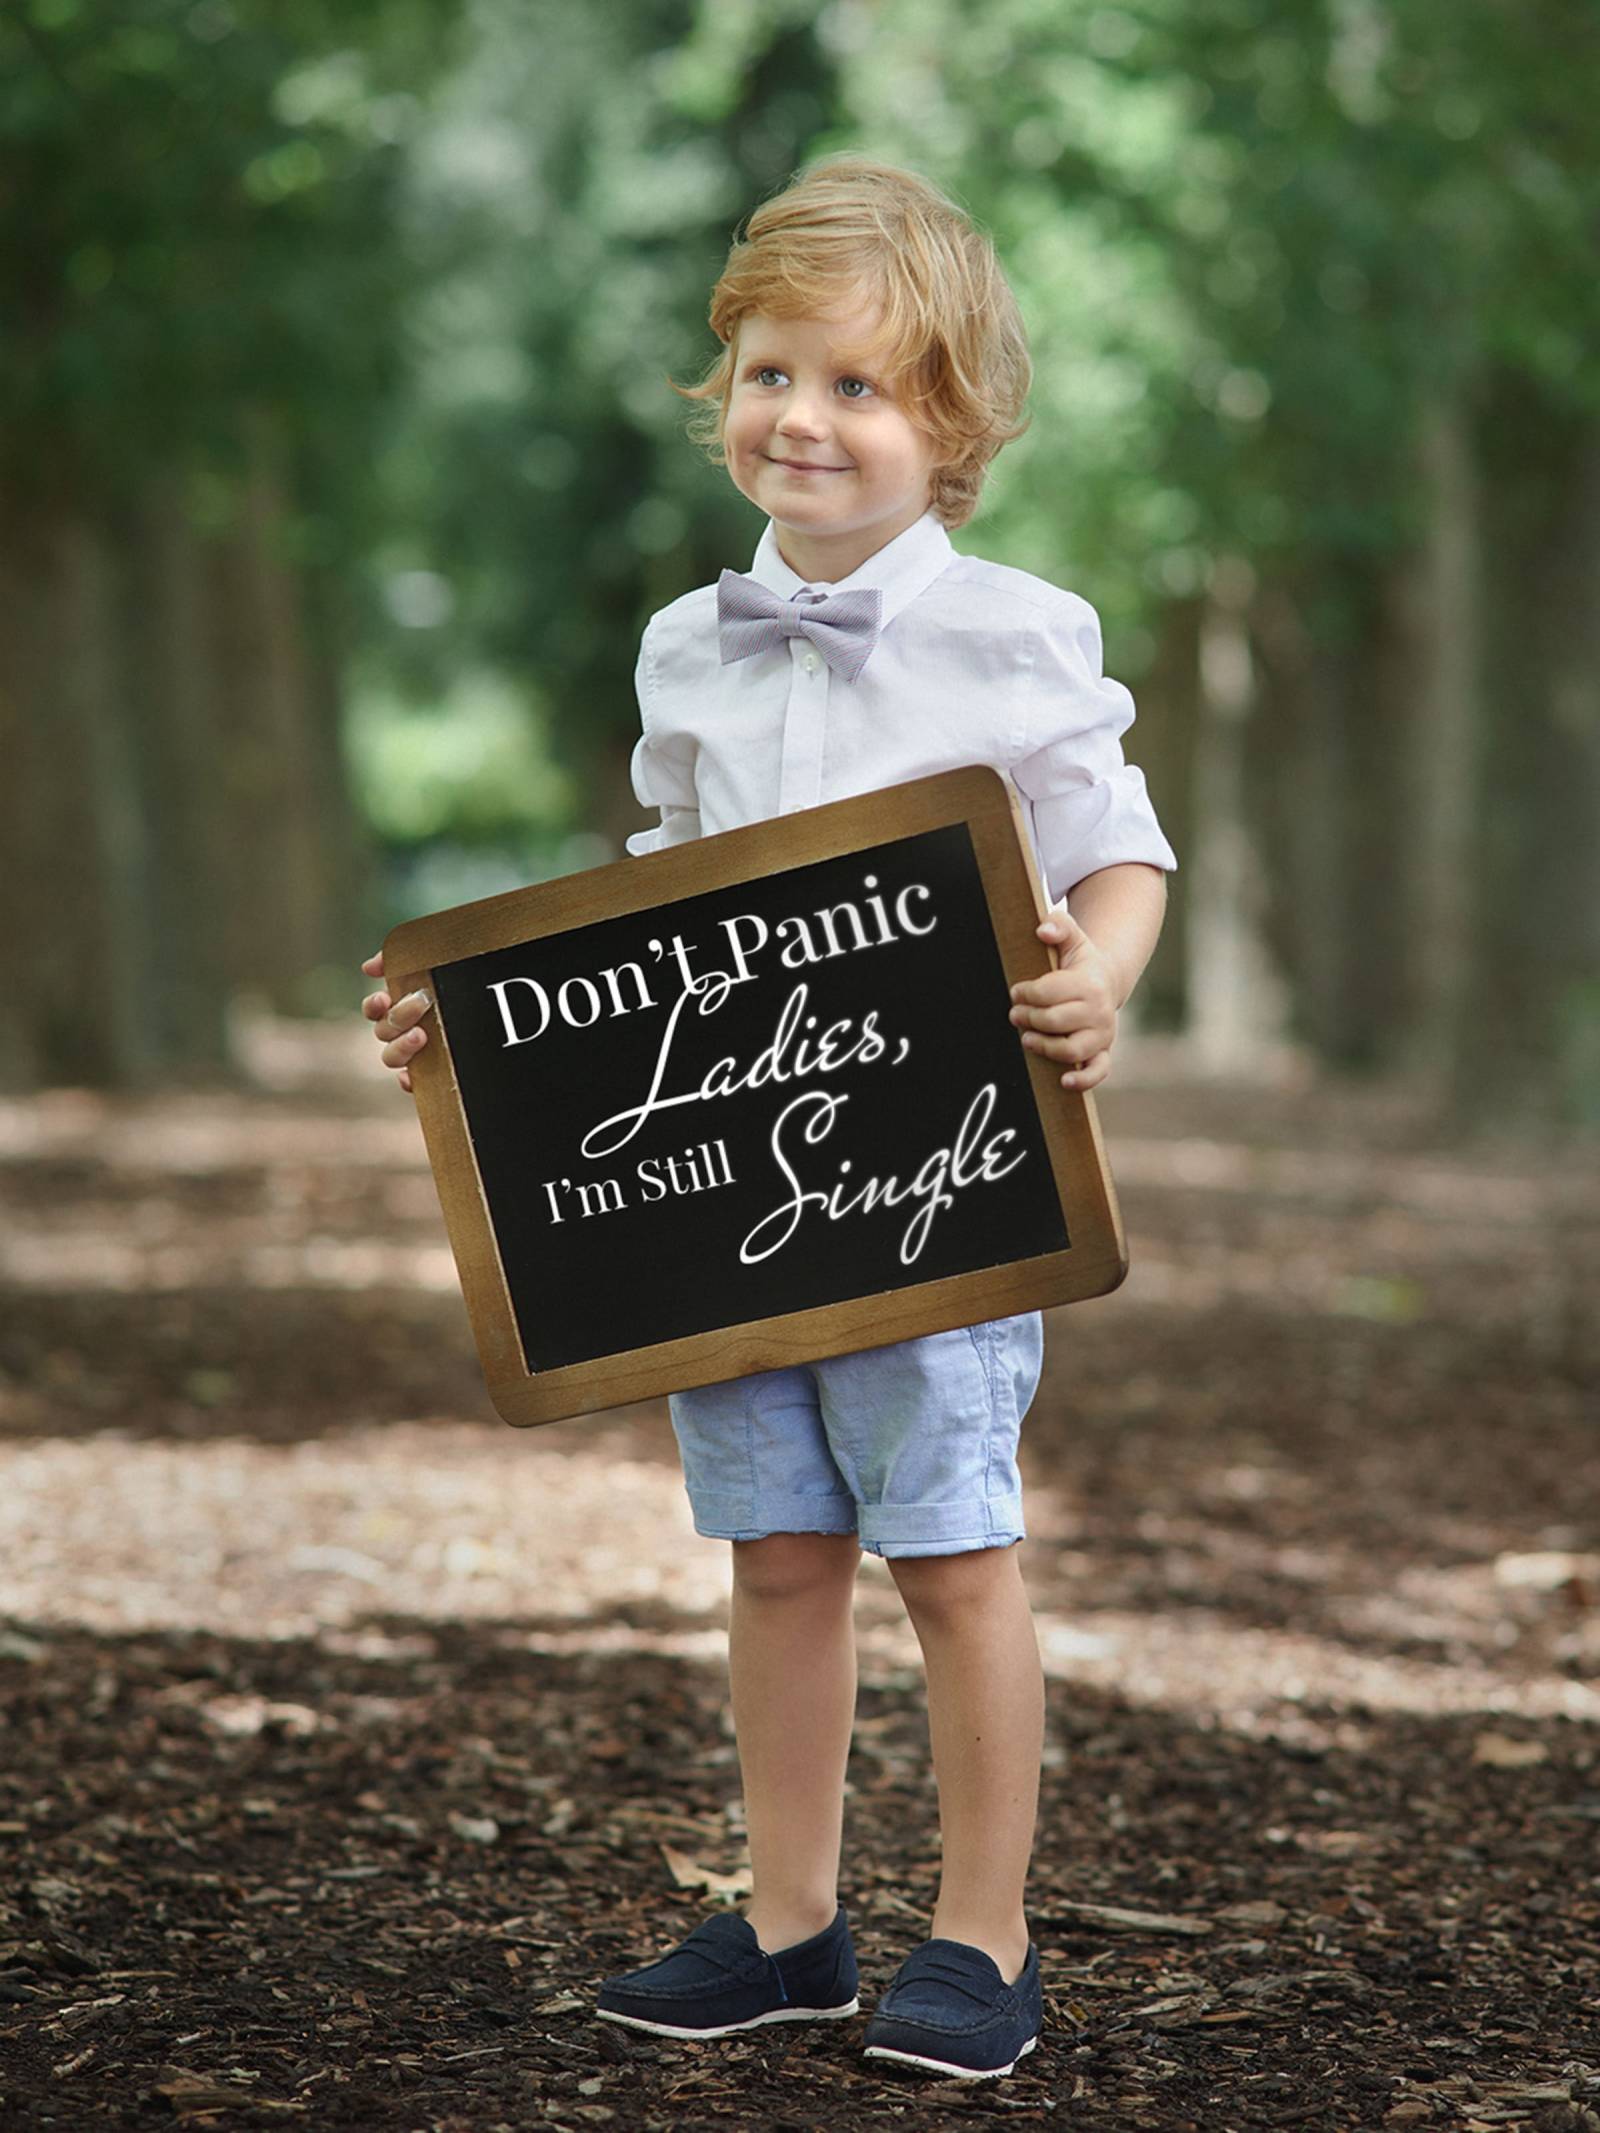 Ring bearer in white shirt, bow tie and blue shorts holding a sign.